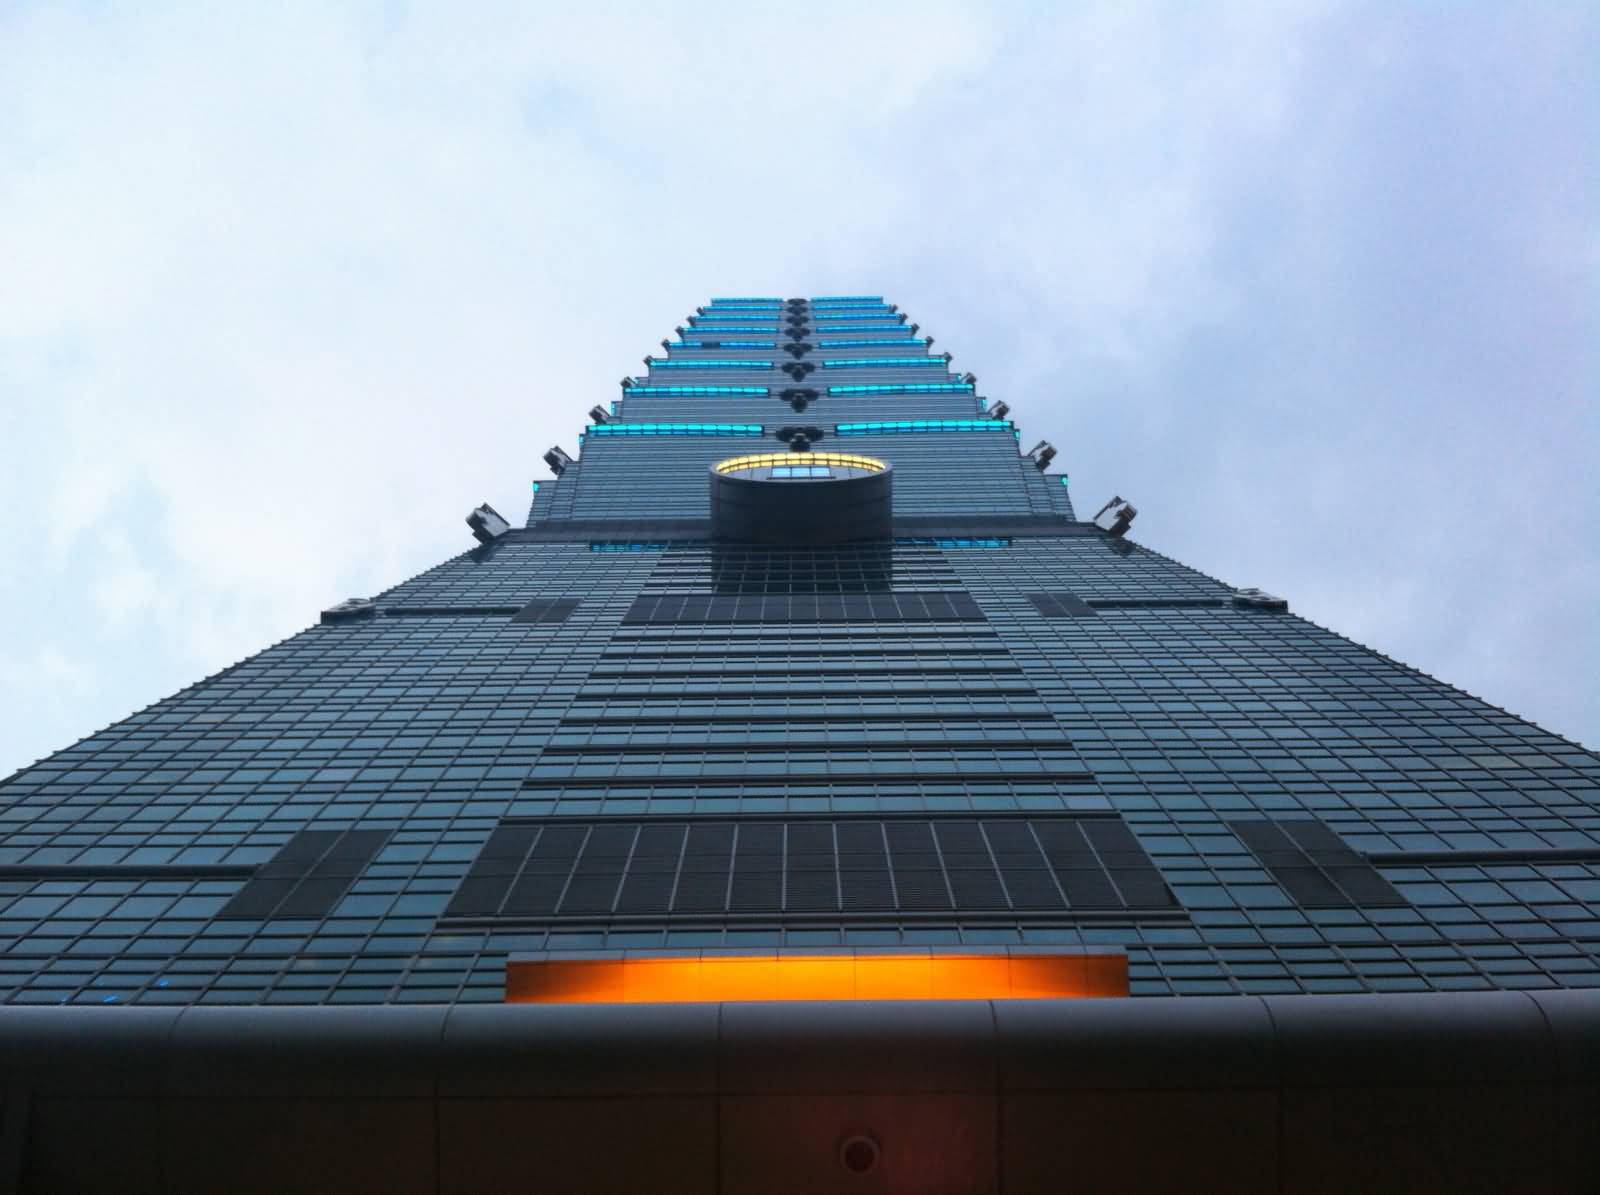 Incredible Taipei 101 Tower View From Below